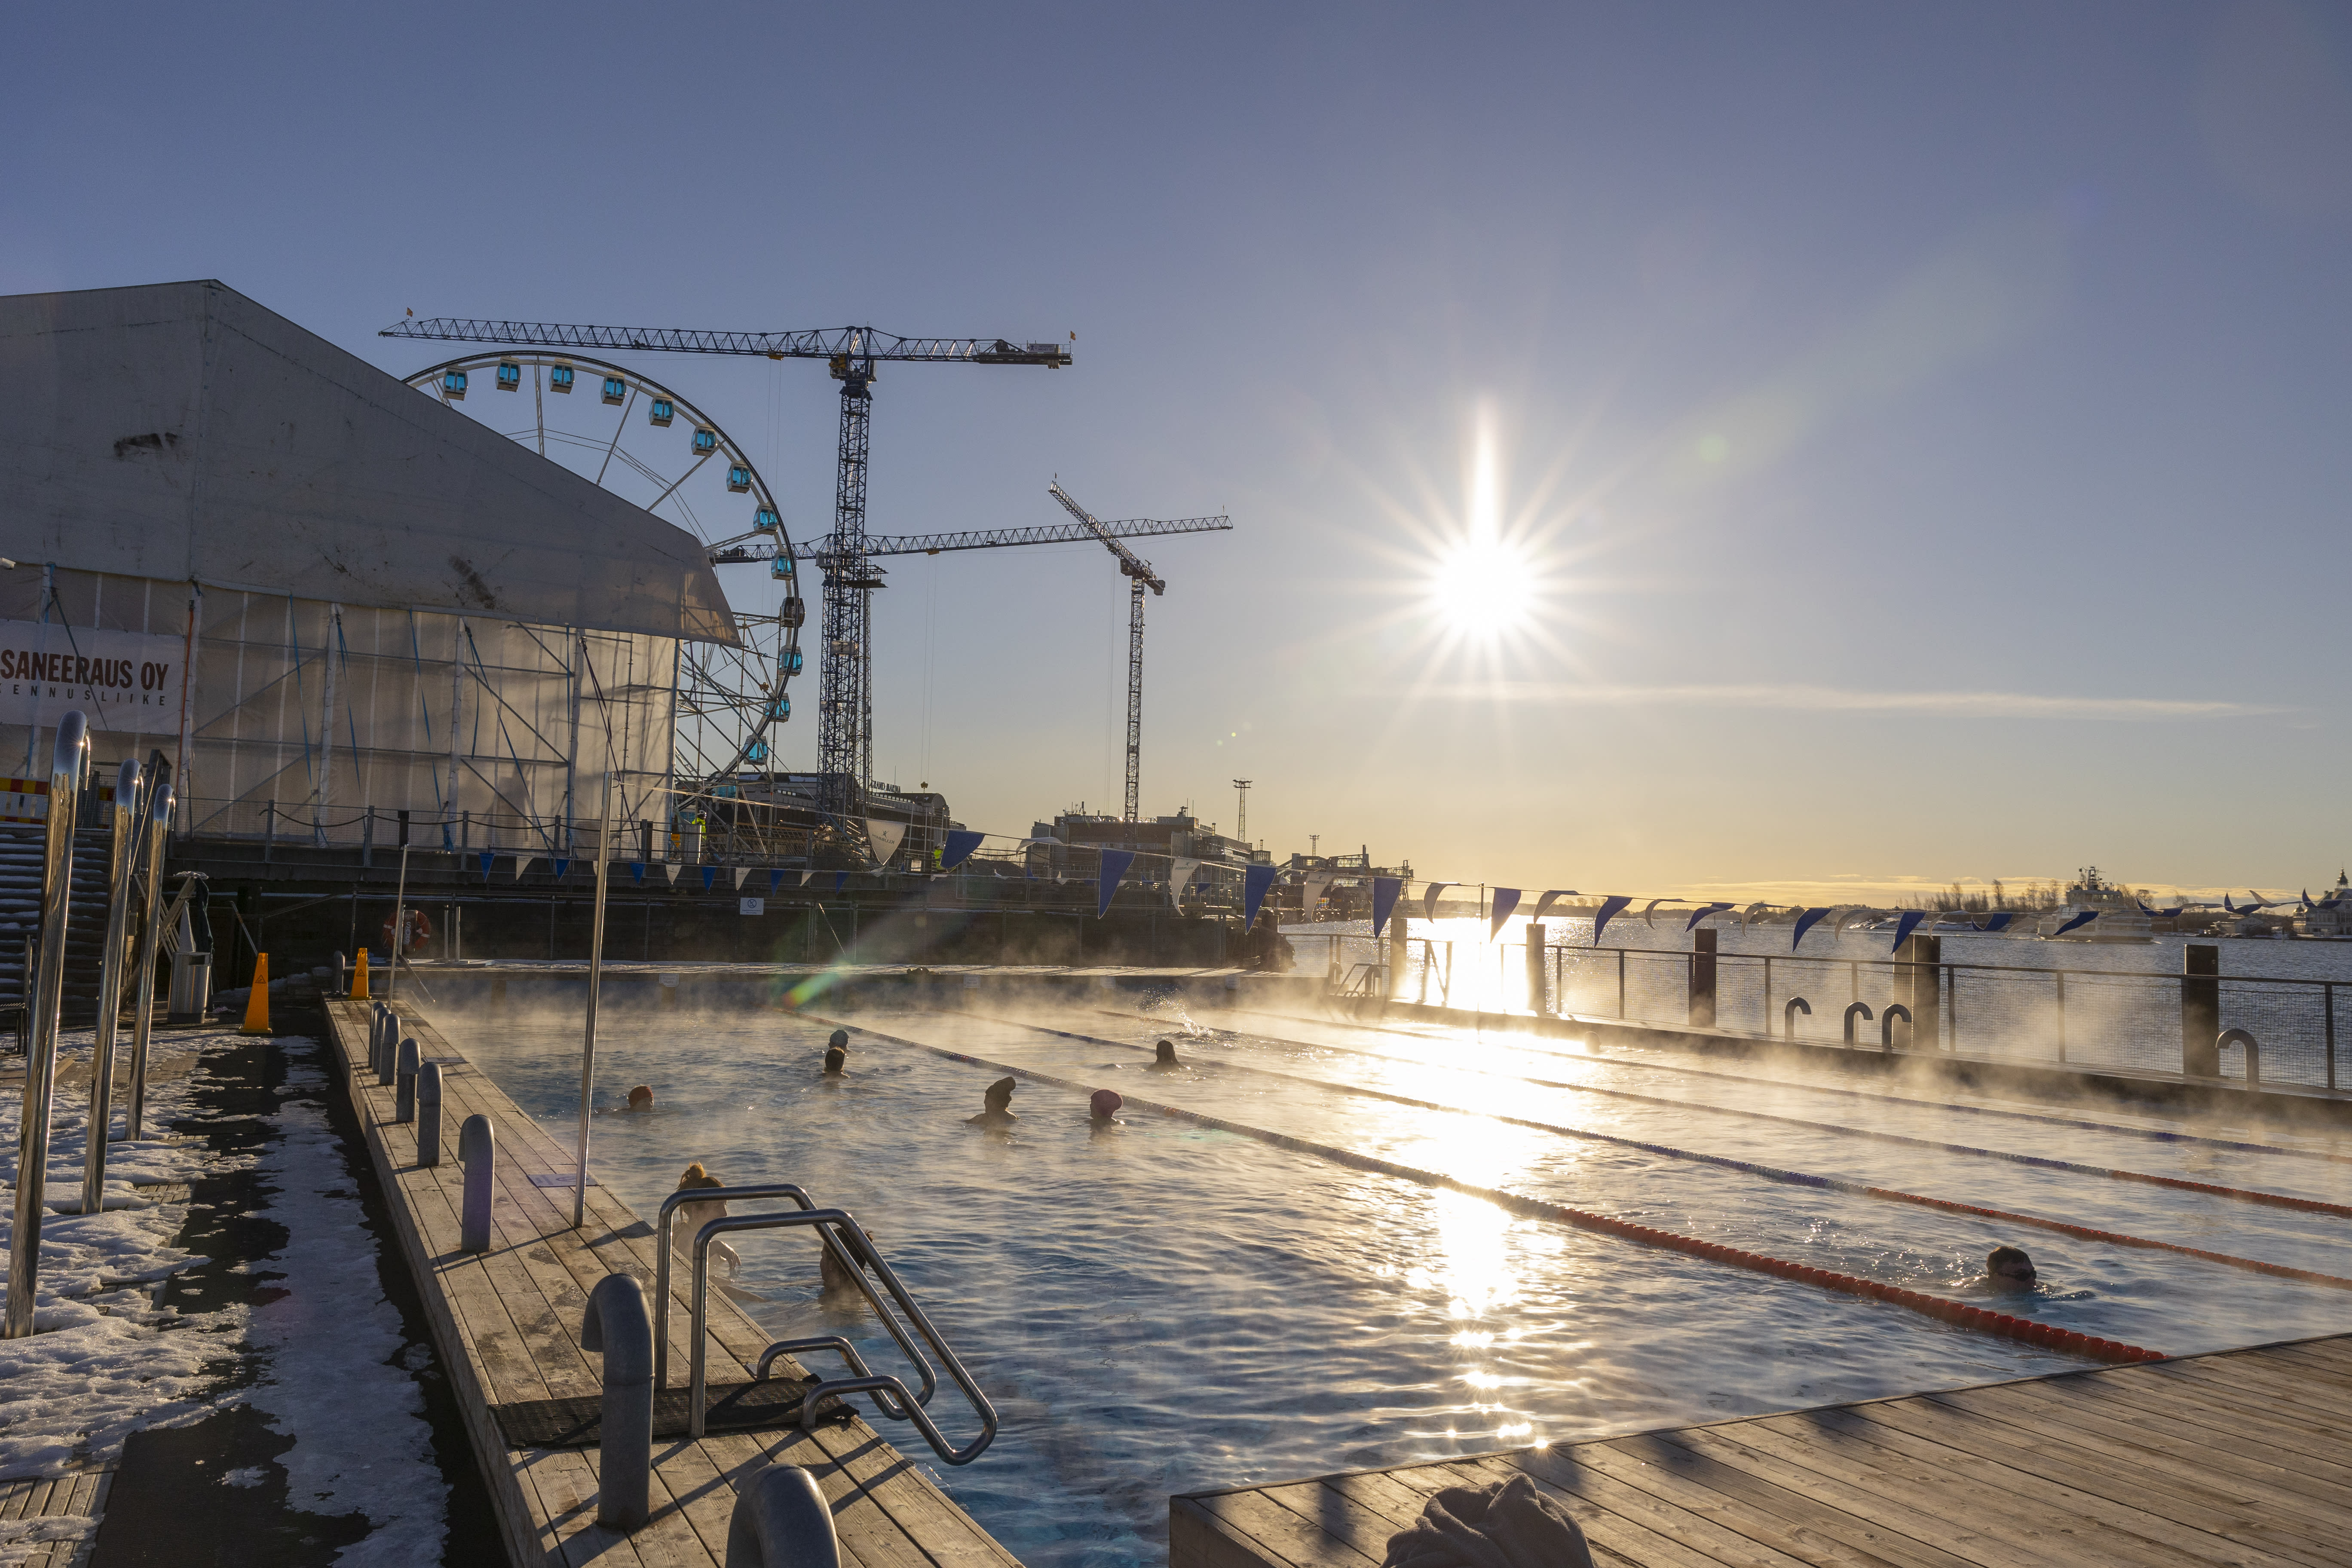 Helsingin Allas Sea Pool is suing Viking Line for 3 million euros for collision damage to the pier